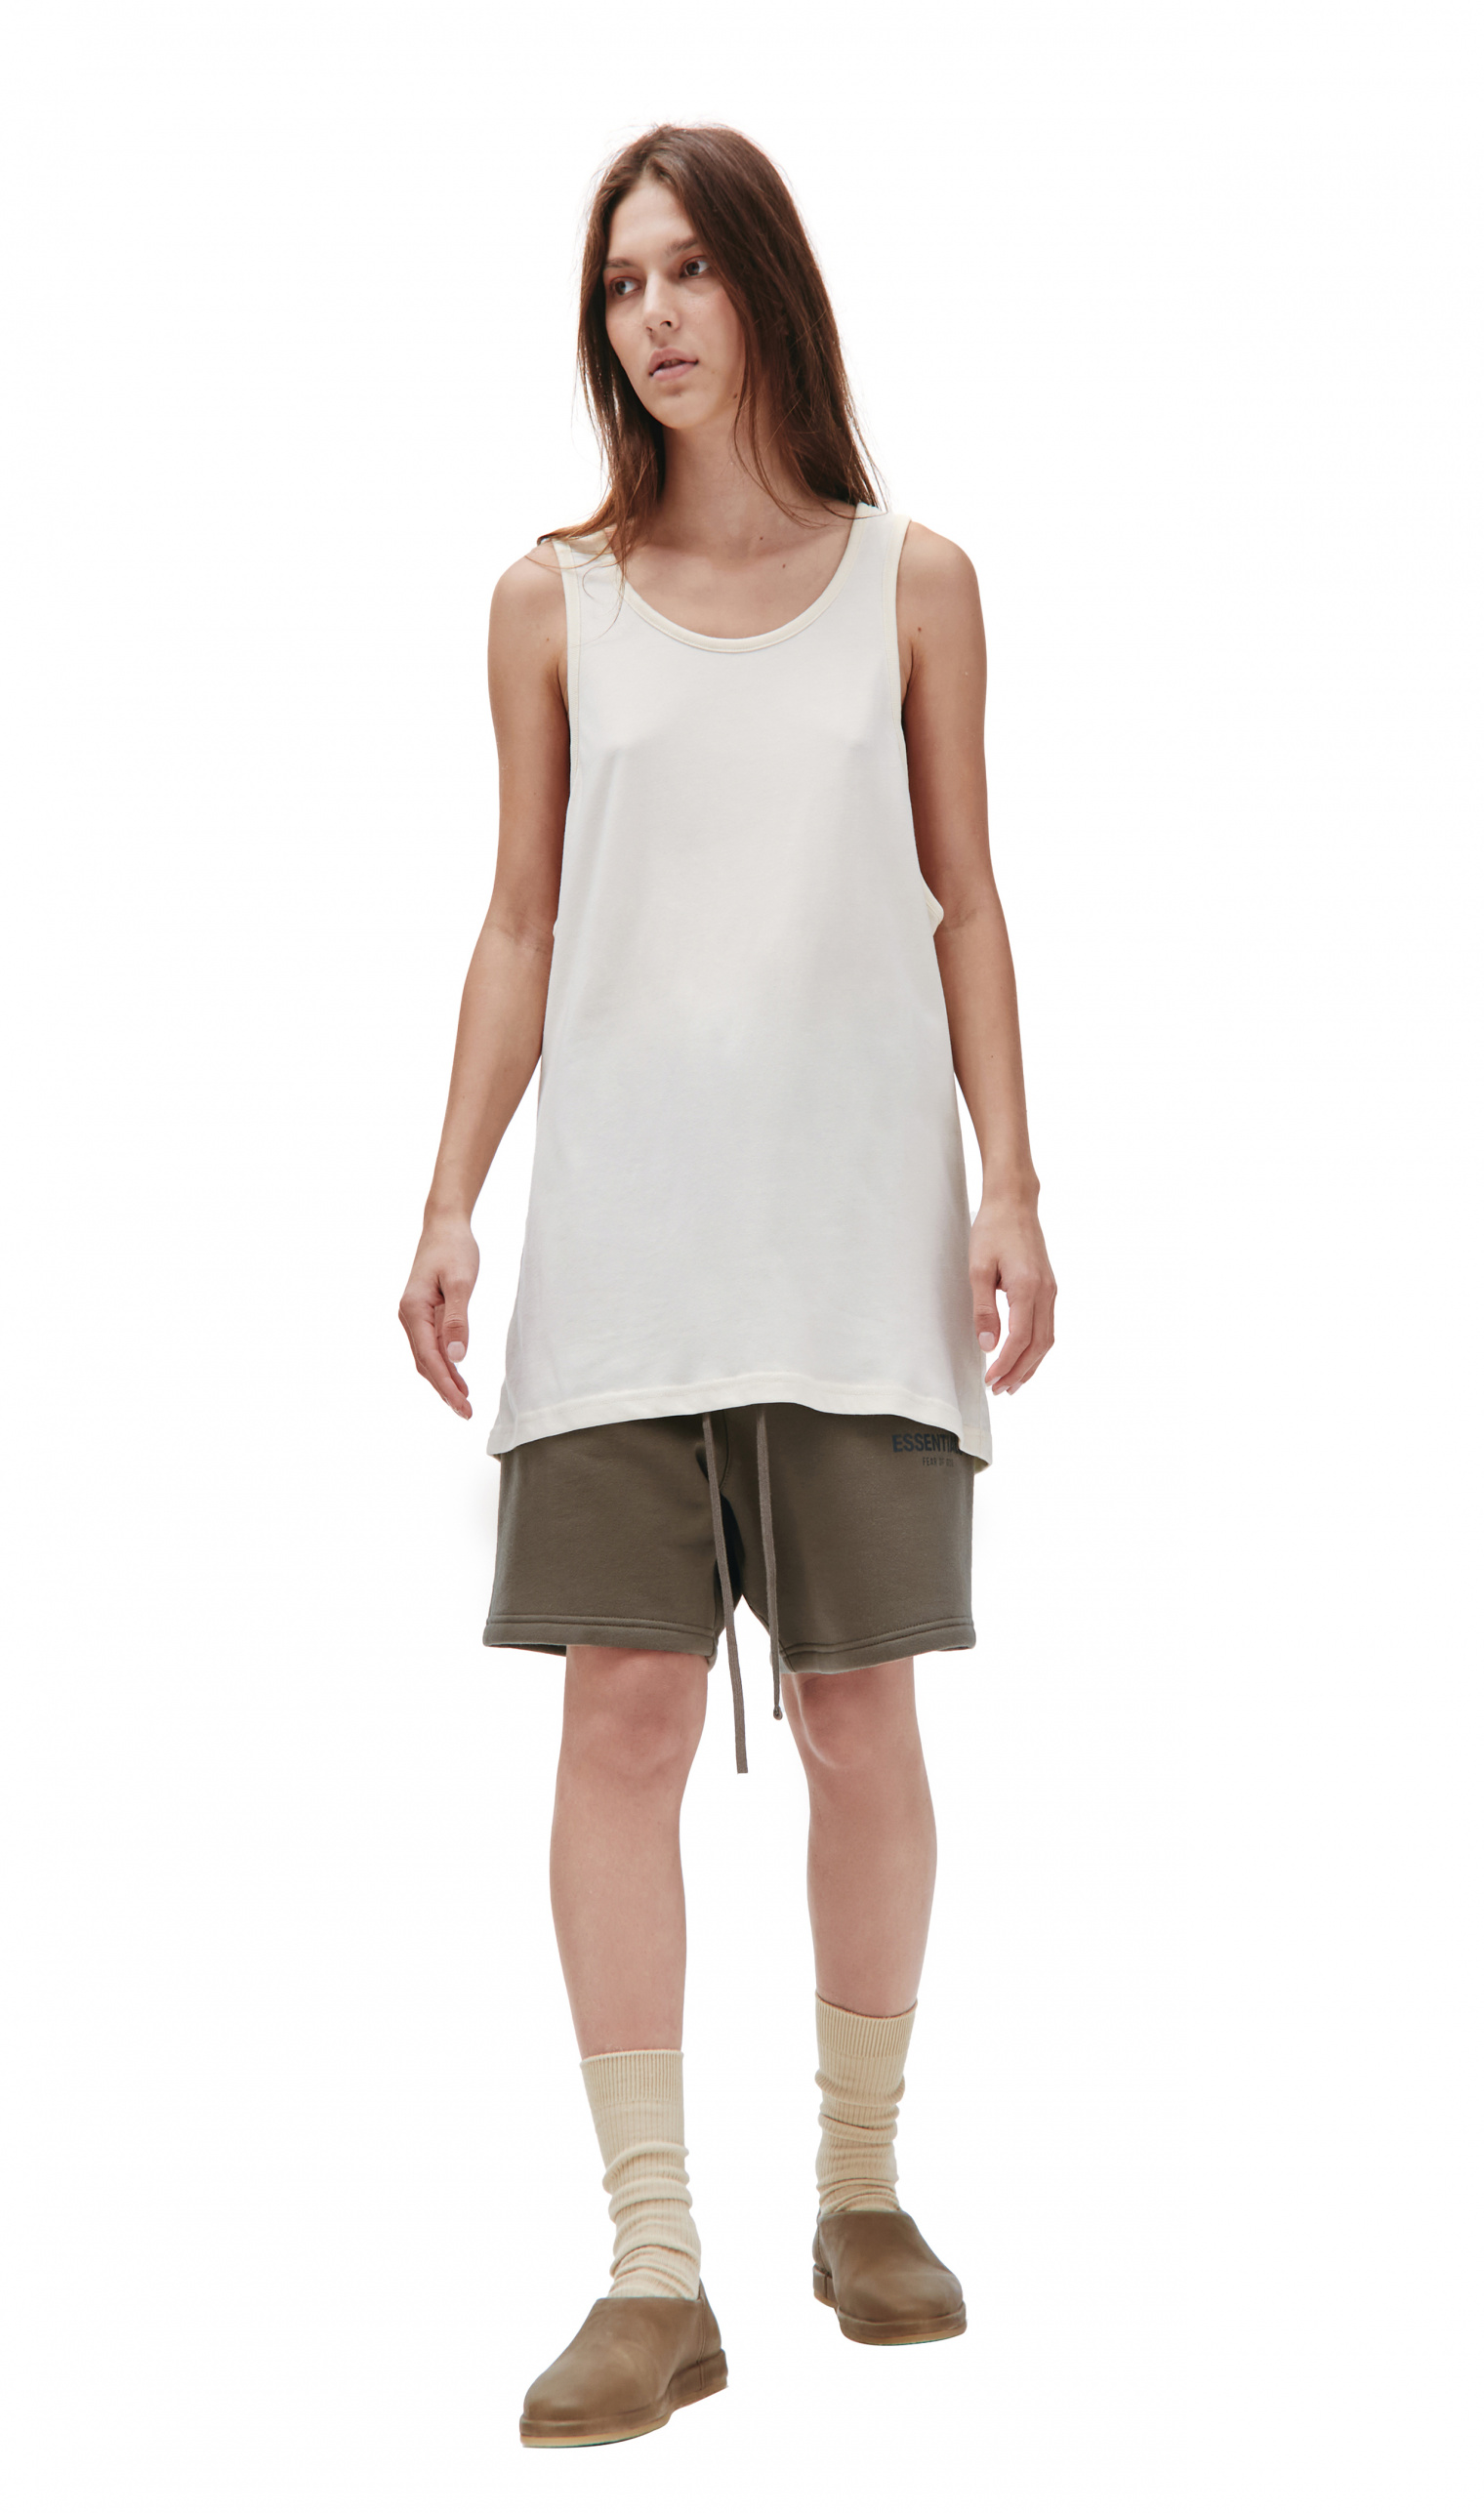 Fear of God Essentials 3 pack tank top